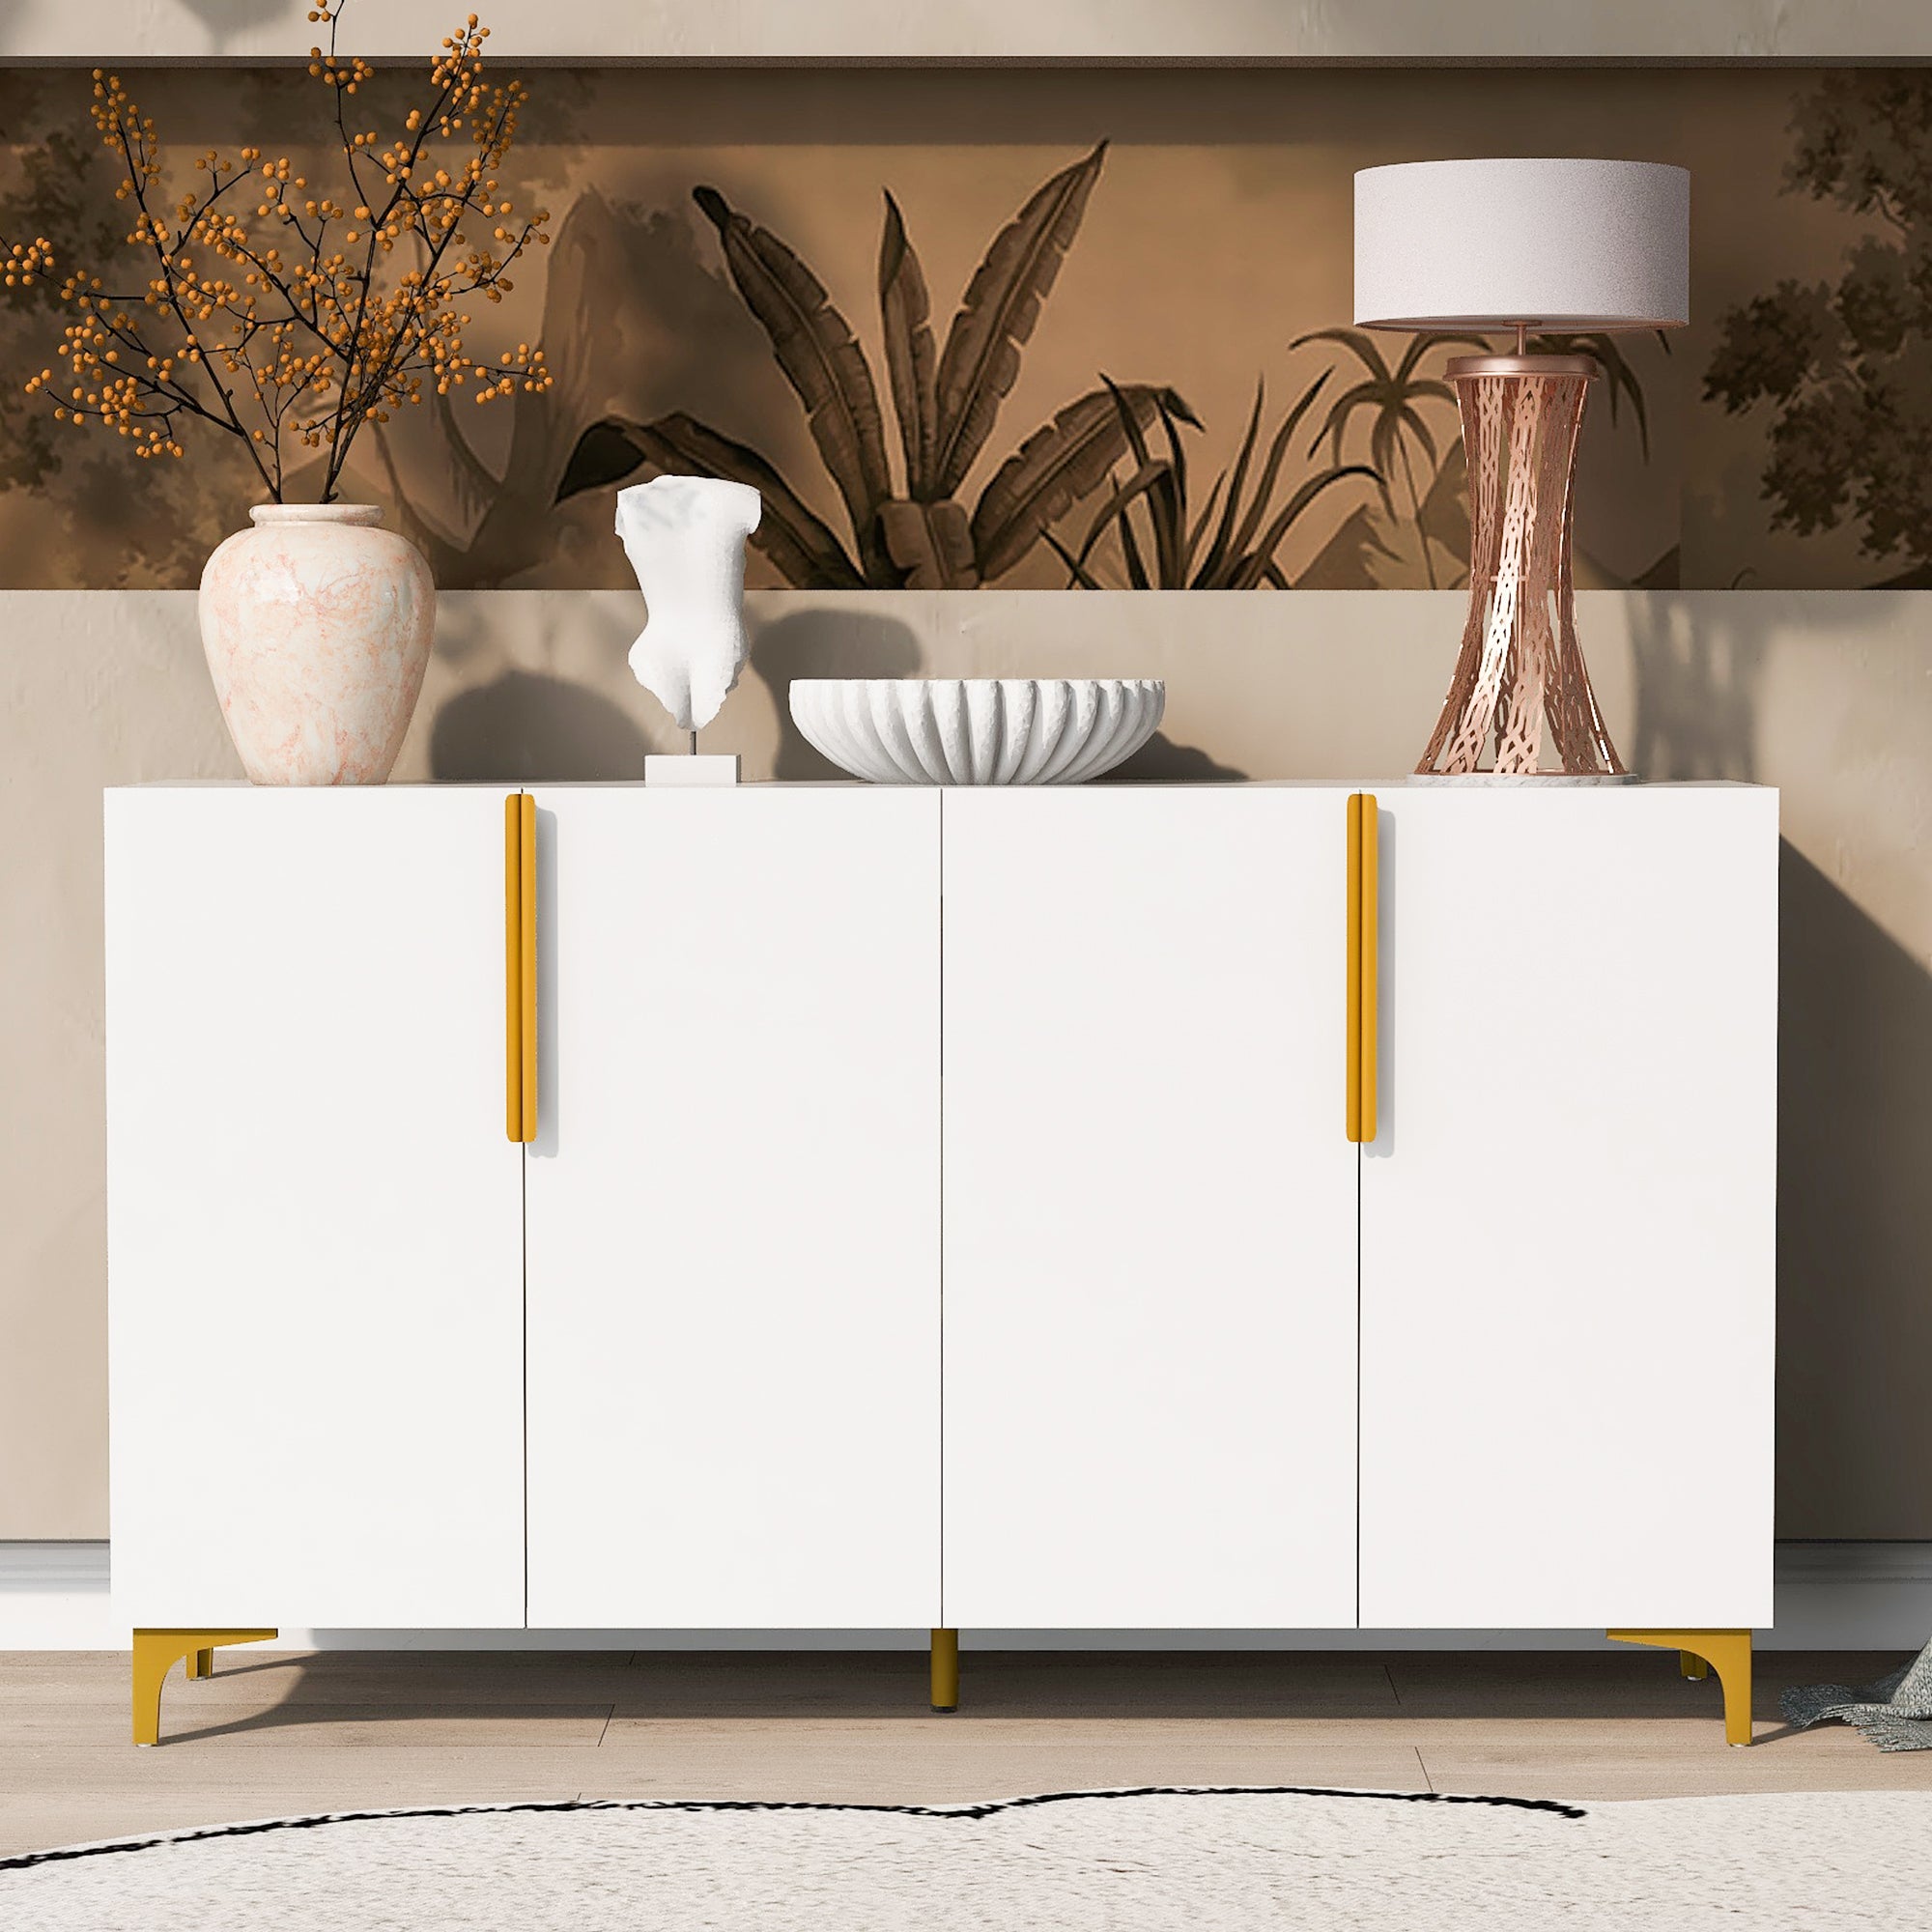 🆓🚛 4-Door Glossy Finish Light Luxury Sideboard Storage Cabinet, Adjustable,  Suitable for Living Room, Study, Hallway, White